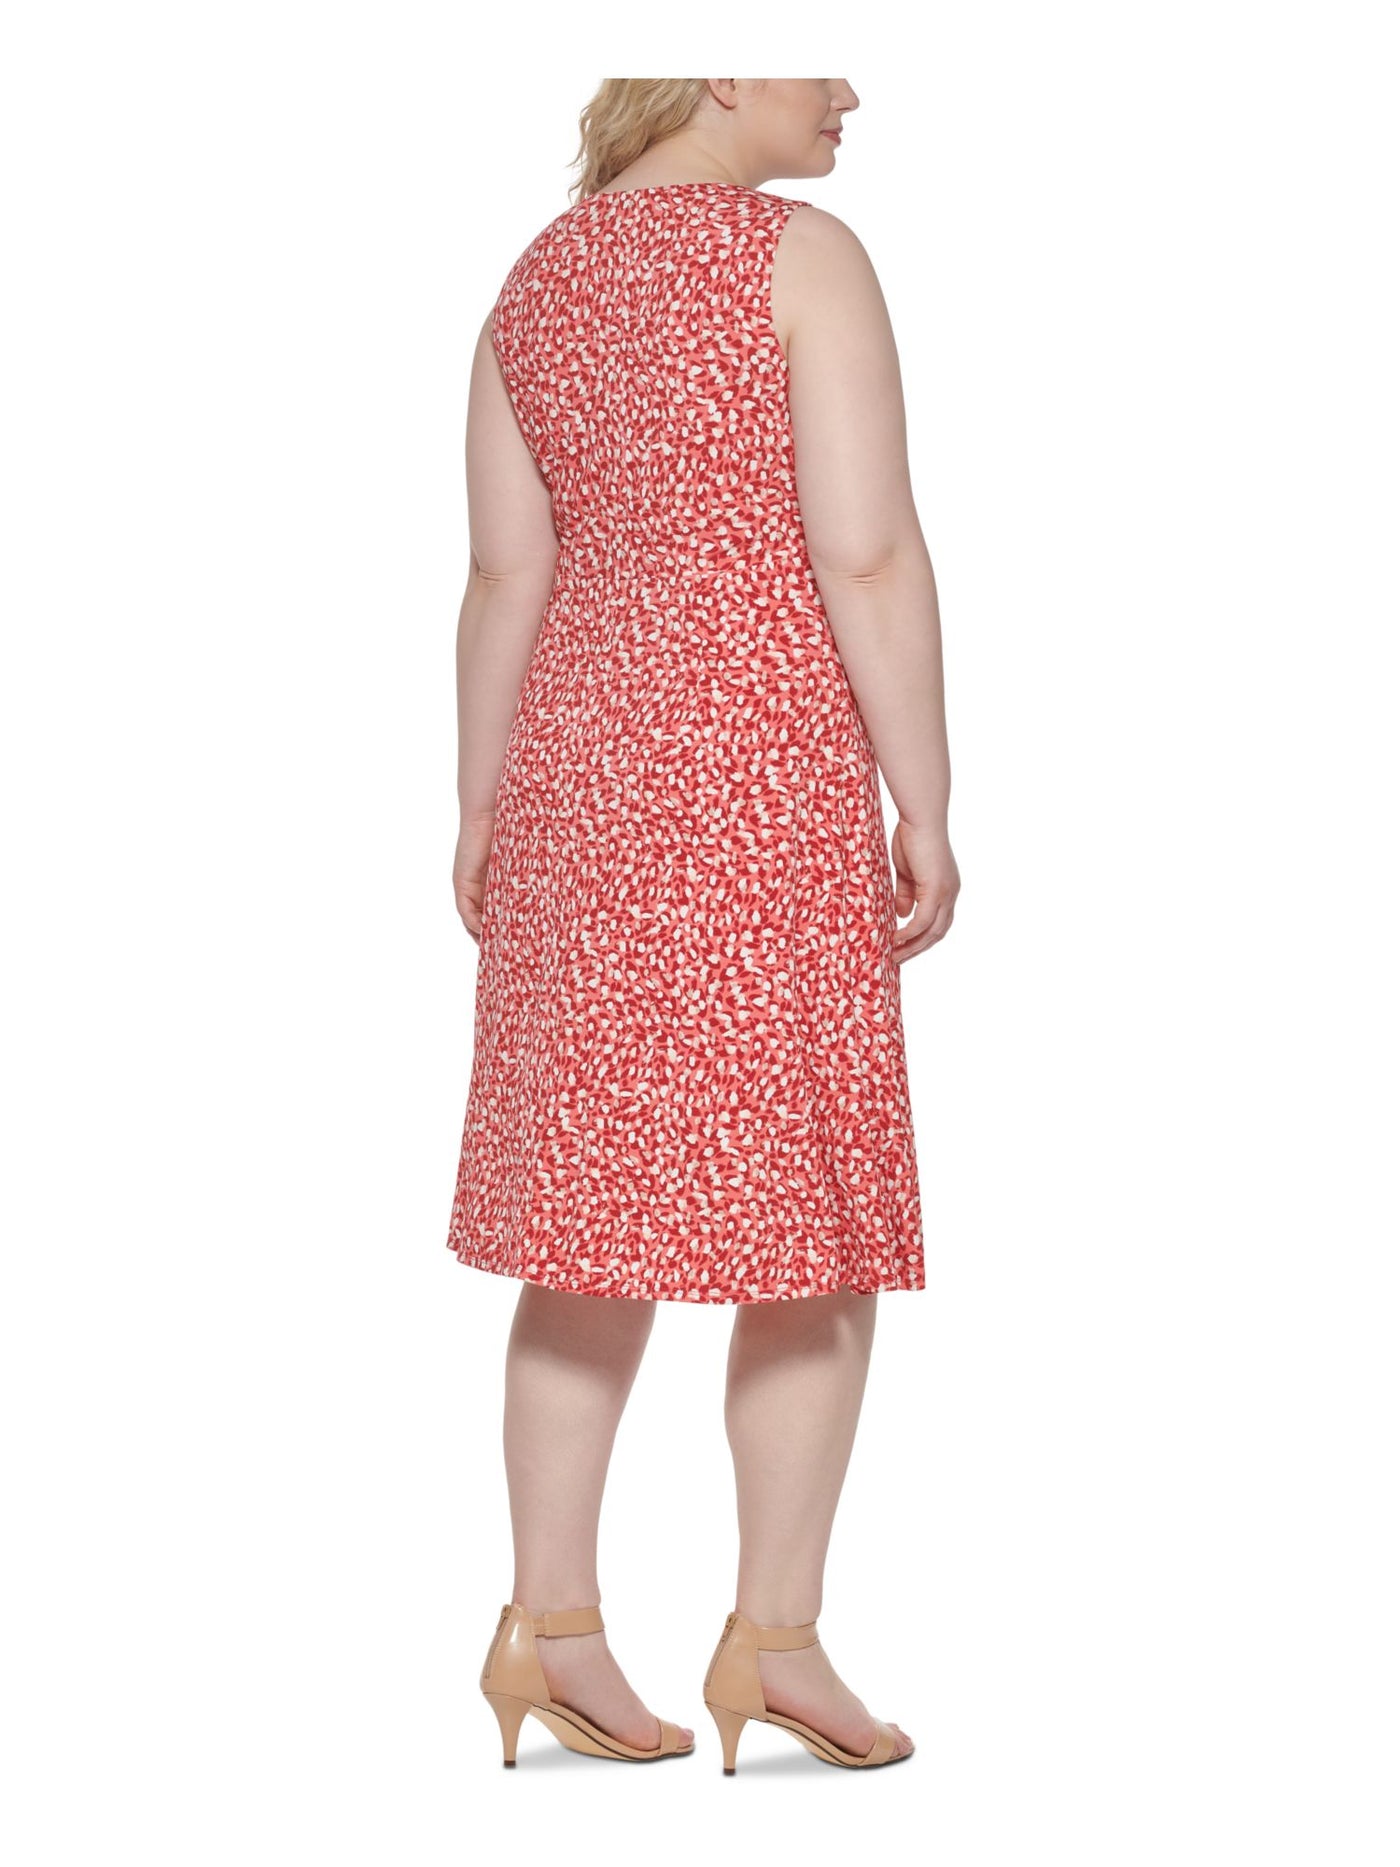 VINCE CAMUTO Womens Coral Jersey Pleated Animal Print Sleeveless V Neck Knee Length Cocktail Fit + Flare Dress Plus 20W